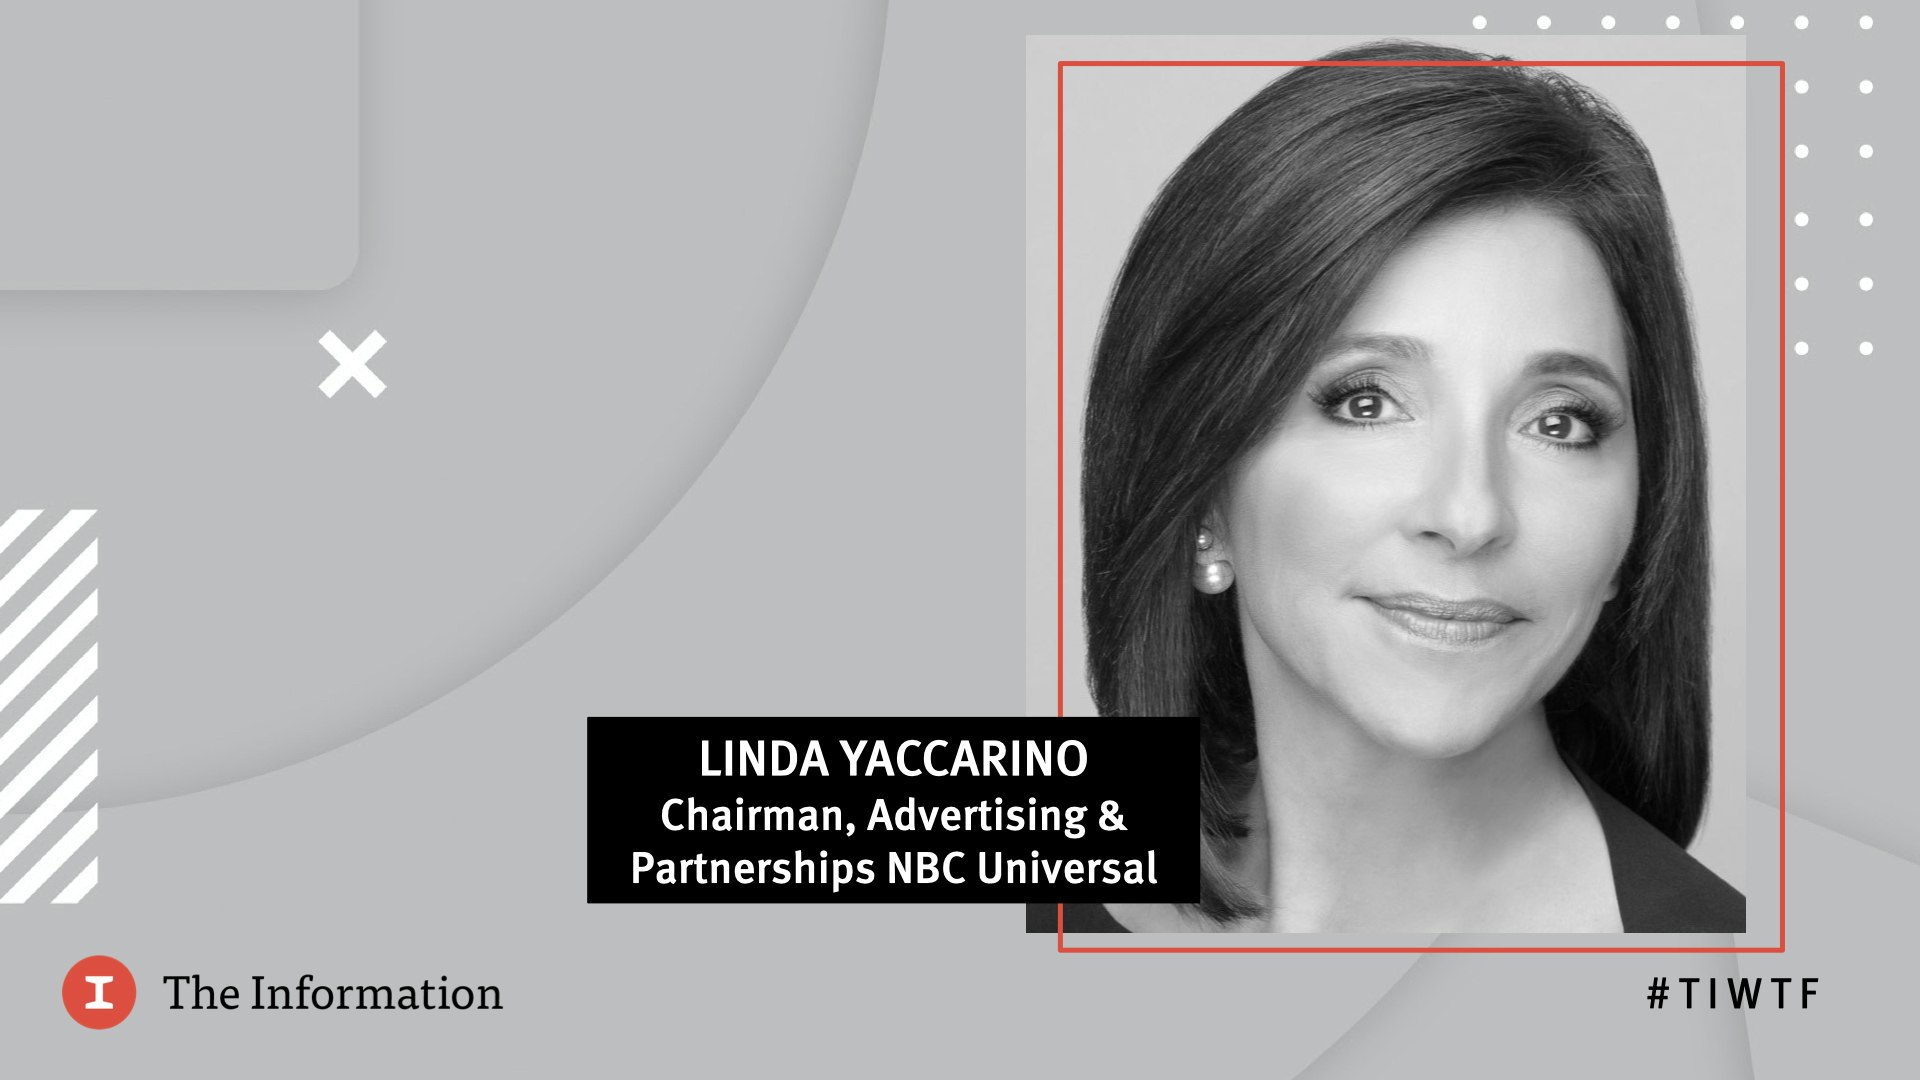 WTF 2020 - NBC Universal's Chairman of Advertising & Partnerships Linda Yaccarino in conversation with Jessica Toonkel, reporter at The Information